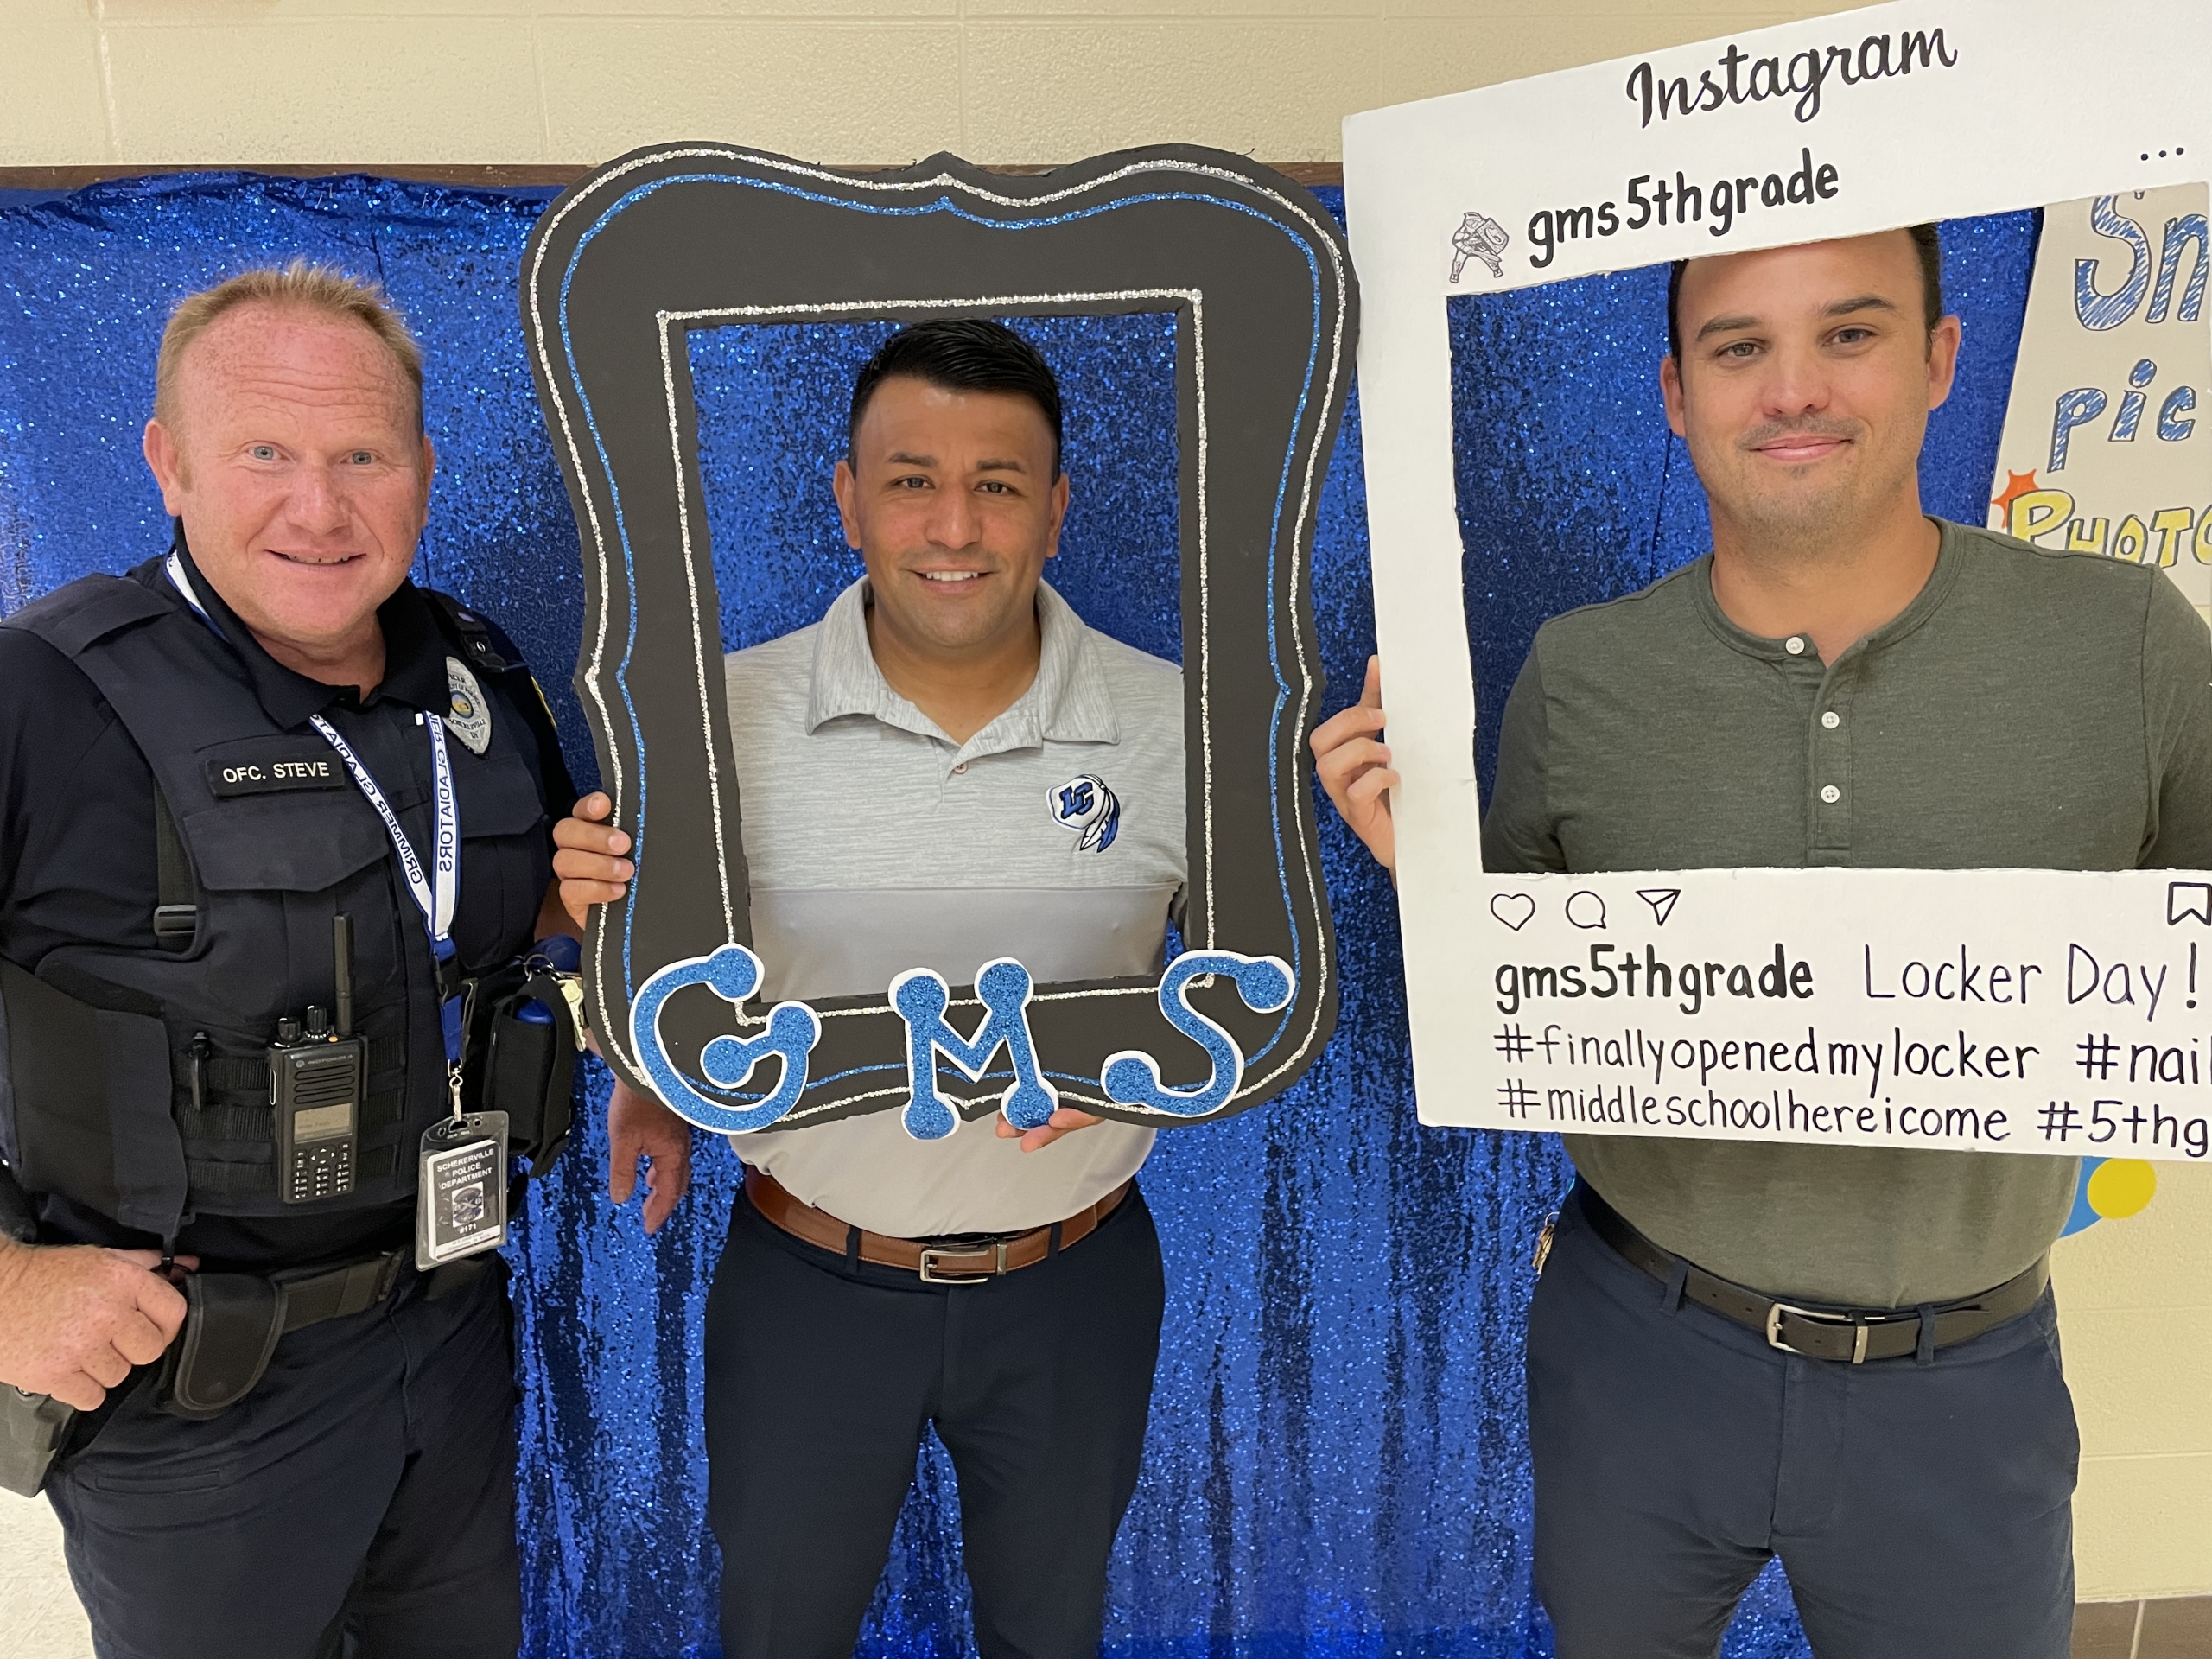 It was another successful Locker Day at Grimmer! School Resource Officer Steve Burton, Assistant Principal Mario Castaneda, and Principal Ryan Bounds were first in line to test-out the photo booth.